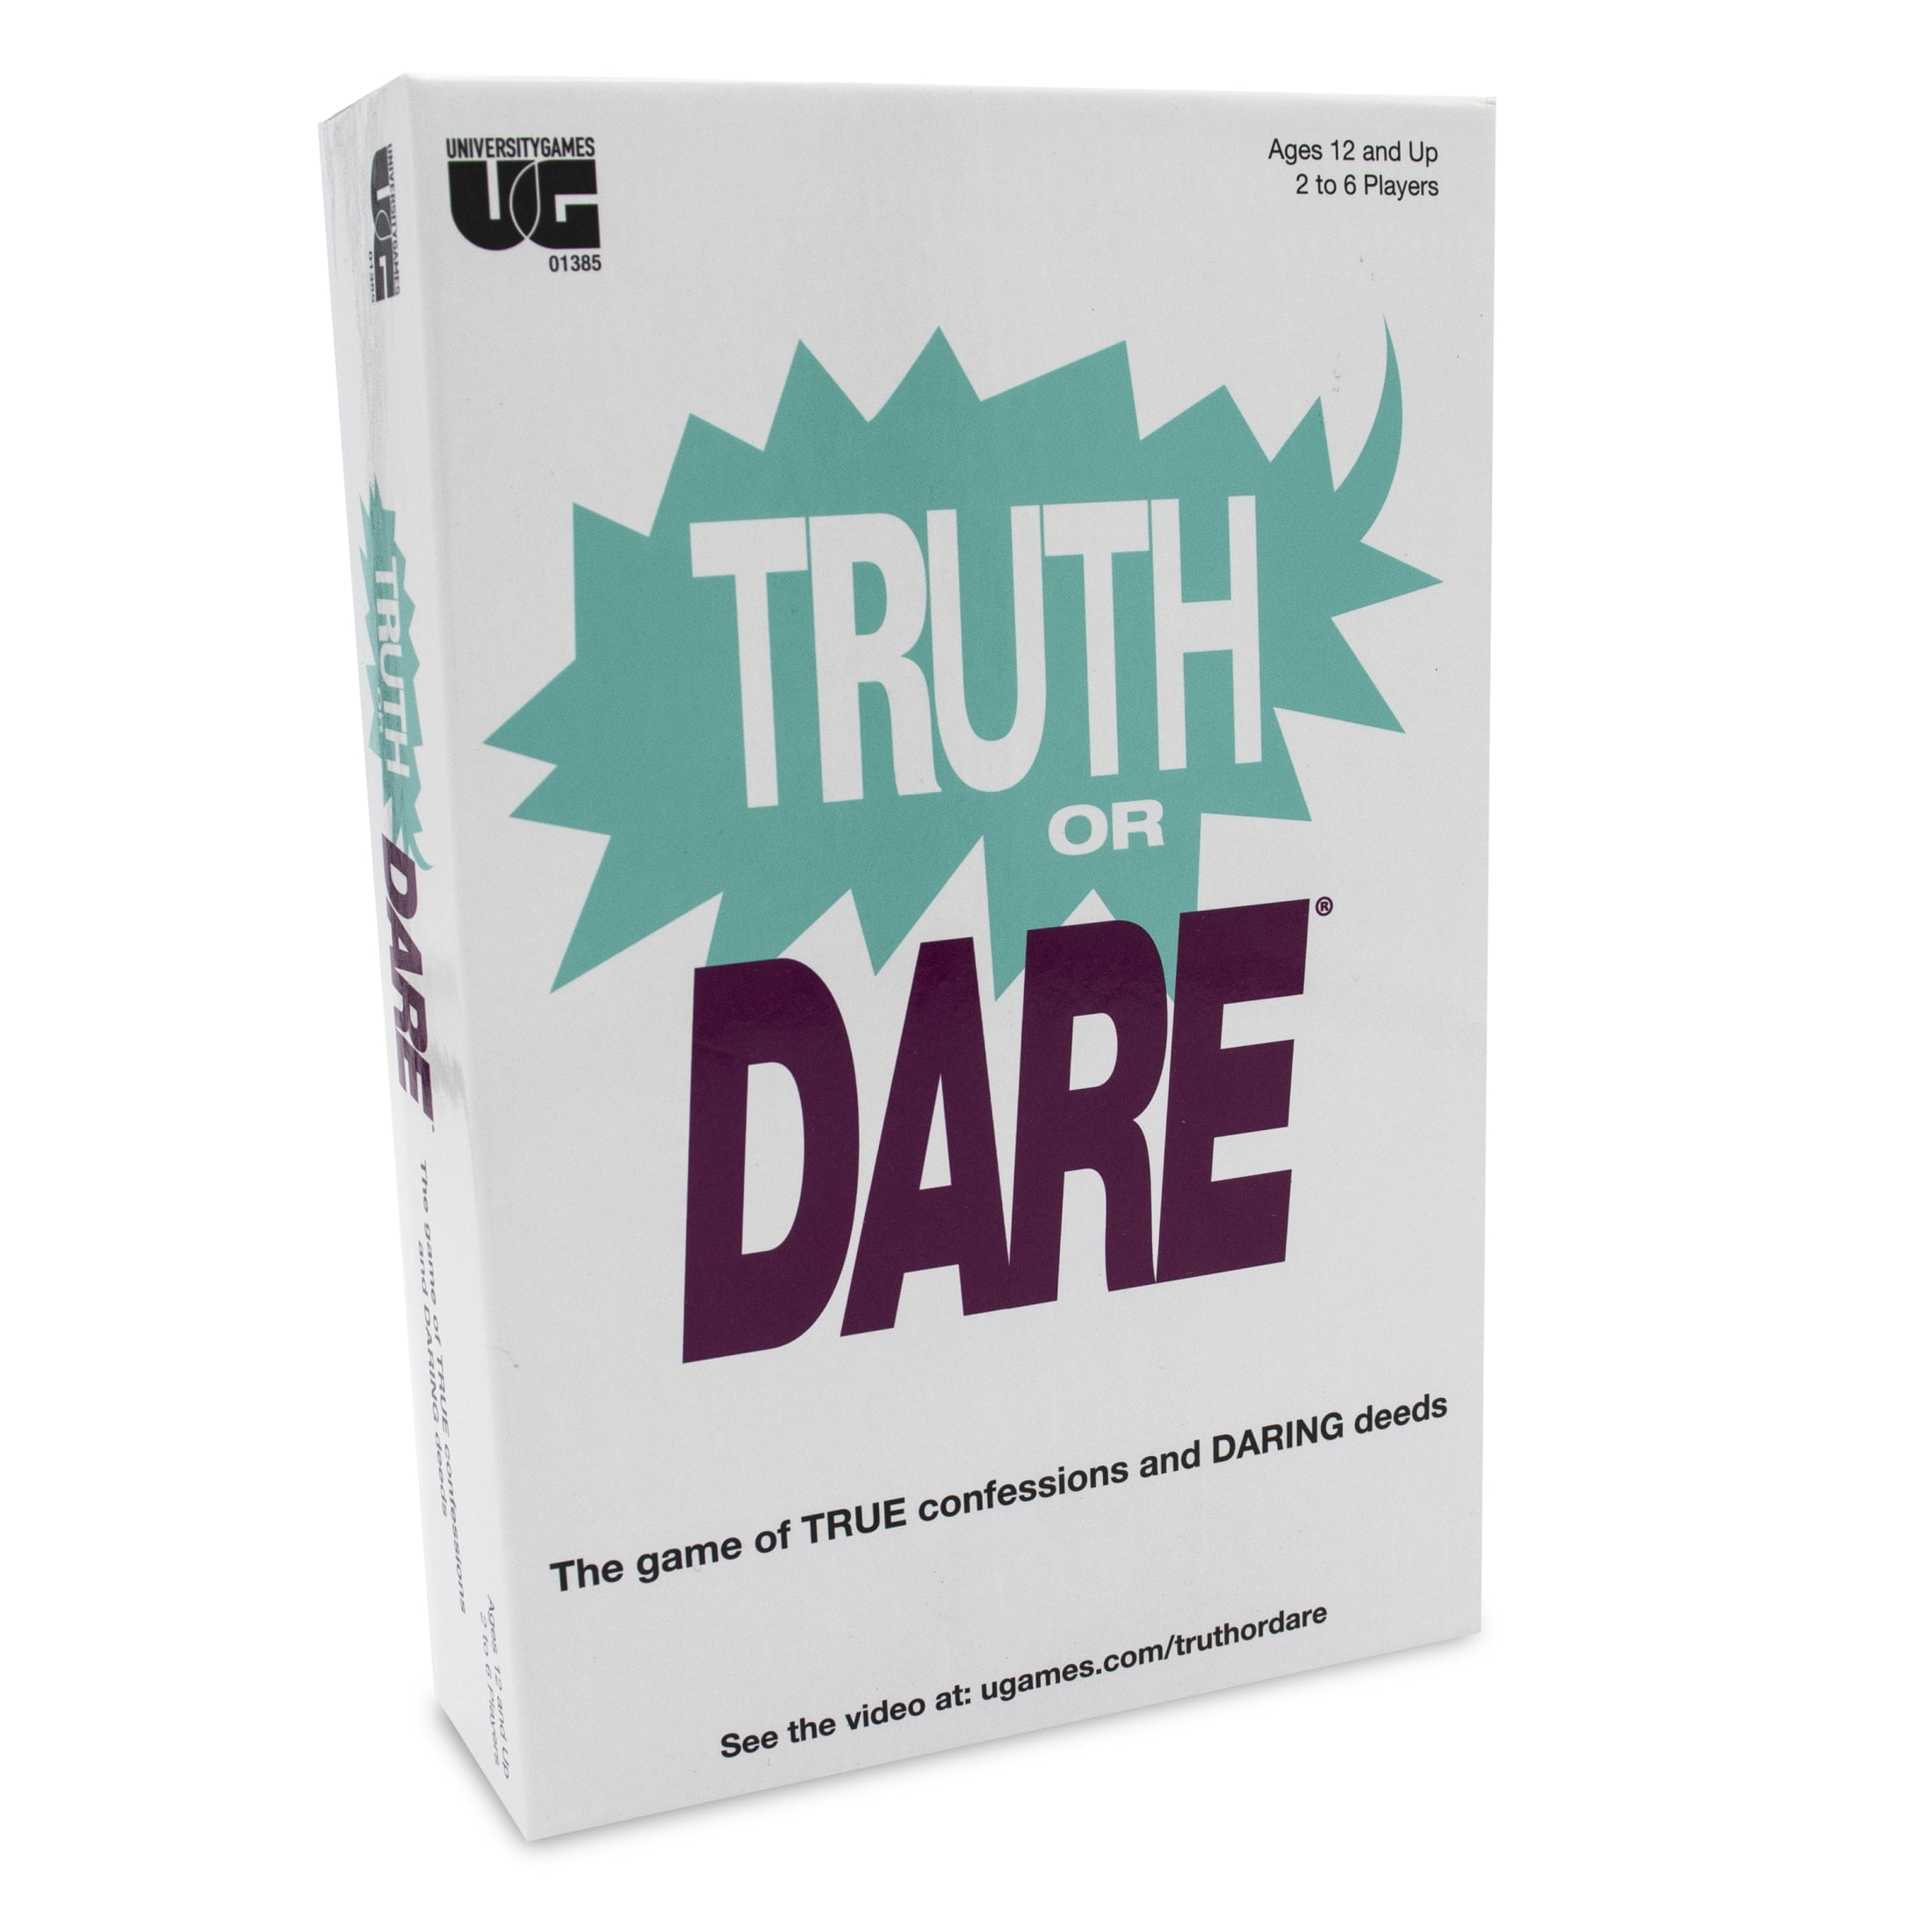 Truth Or Dare For Couples